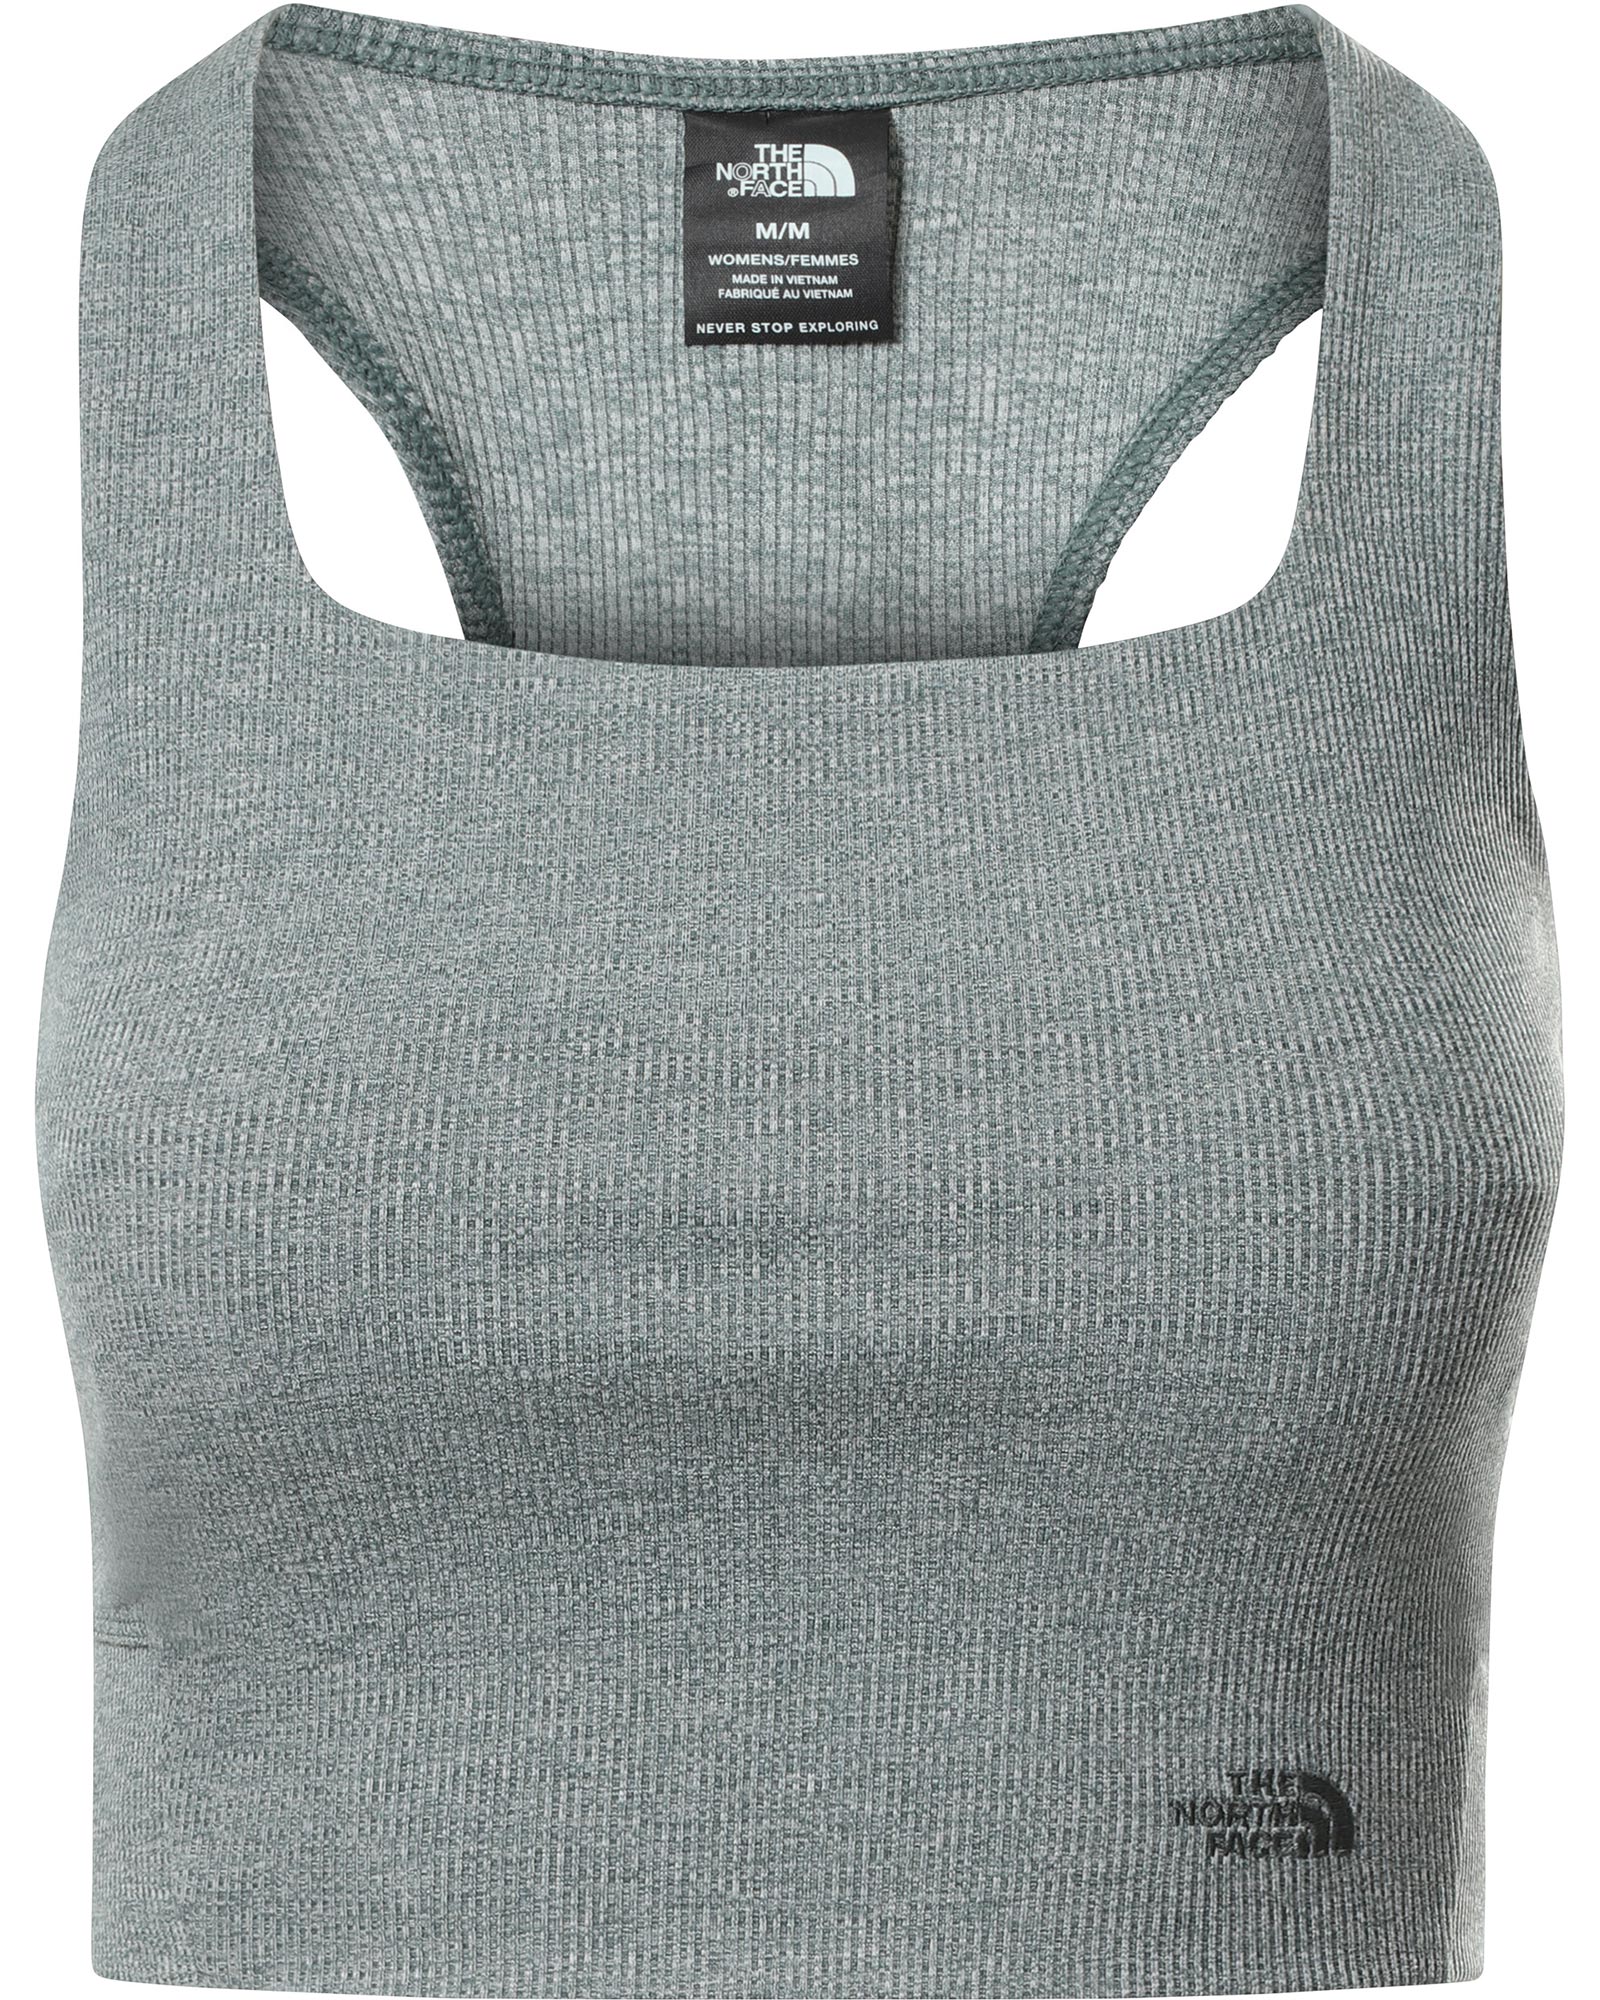 The North Face AT EA Rib Knit Women’s Tank - Balsam Green Heather S